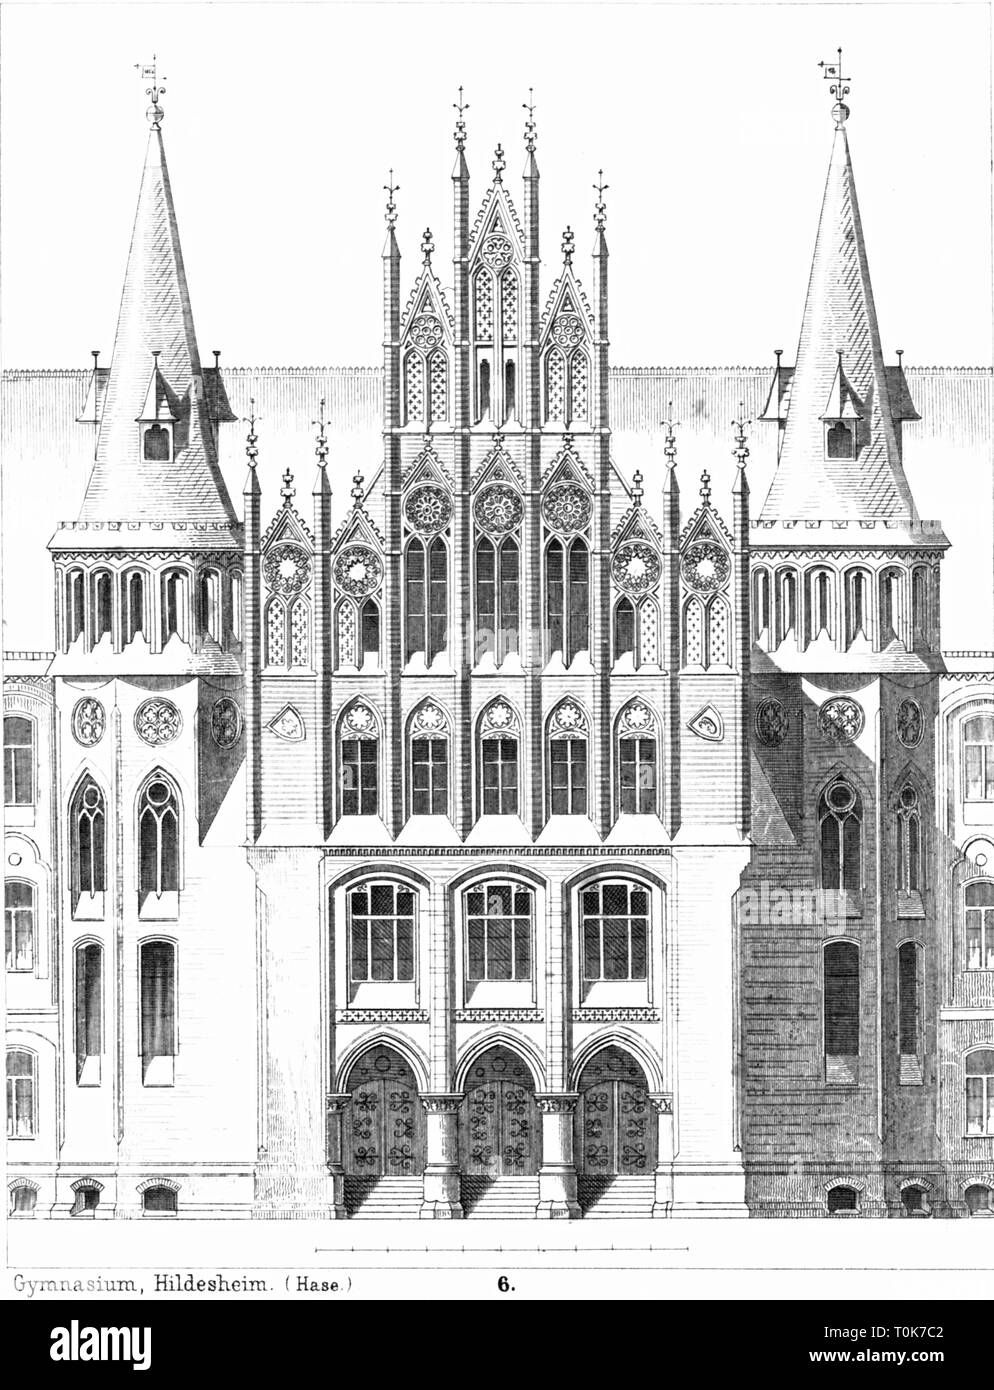 geography / travel, Germany, Lower Saxony, Hildesheim, buildings, Andreanum secondary school building, built 1869 (destroyed in 1945), architect: Conrad Wilhelm Hase, exterior view, illustration from 'Denkmaeler der Kunst' (Monuments of Art), by Wilhelm Luebke and Carl von Luetzow, 3rd edition, Stuttgart 1879, volume 2, chapter on architecture, plate LXI, steel engraving, Central Europe, 19th century, Gothic style, Gothic period, Gothic, neo-Gothic style, neo-Gothic, Gothic Revival, schools, schoolhouse, schoolhouses, school, school building, his, Additional-Rights-Clearance-Info-Not-Available Stock Photo